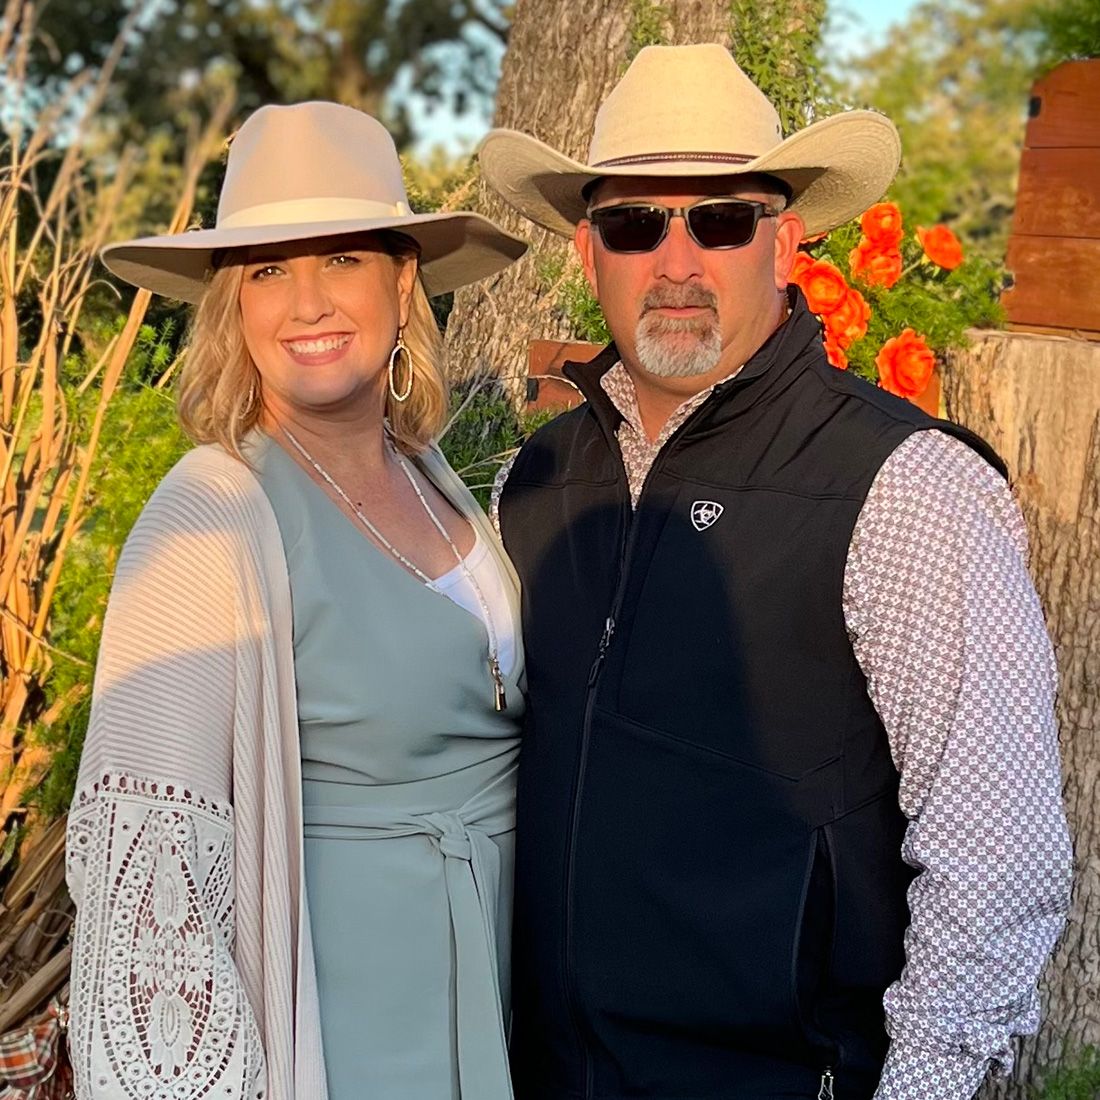 Kelly and Farrah Jernigan standing together in a natural setting. kelly is wearing a black vest and white cowboy hat. farrah is wearing pale green and a beige sweater and light hat.